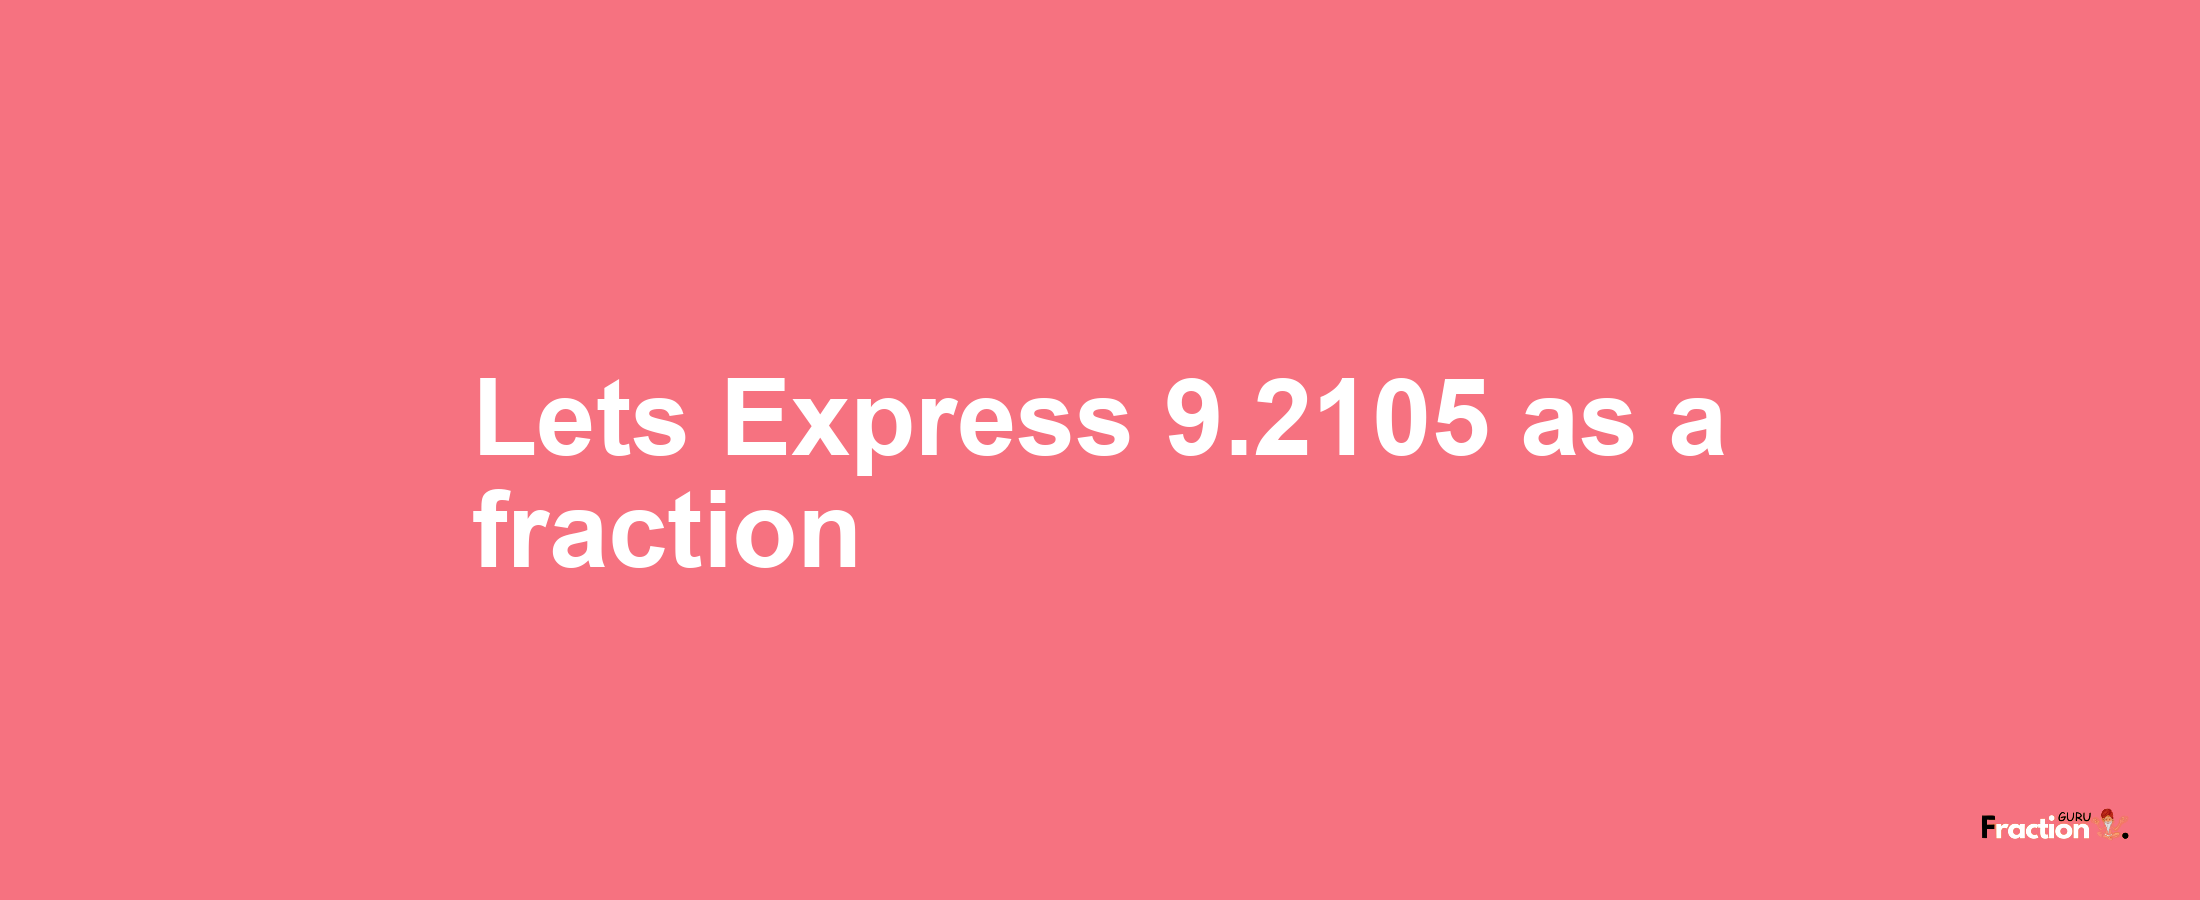 Lets Express 9.2105 as afraction